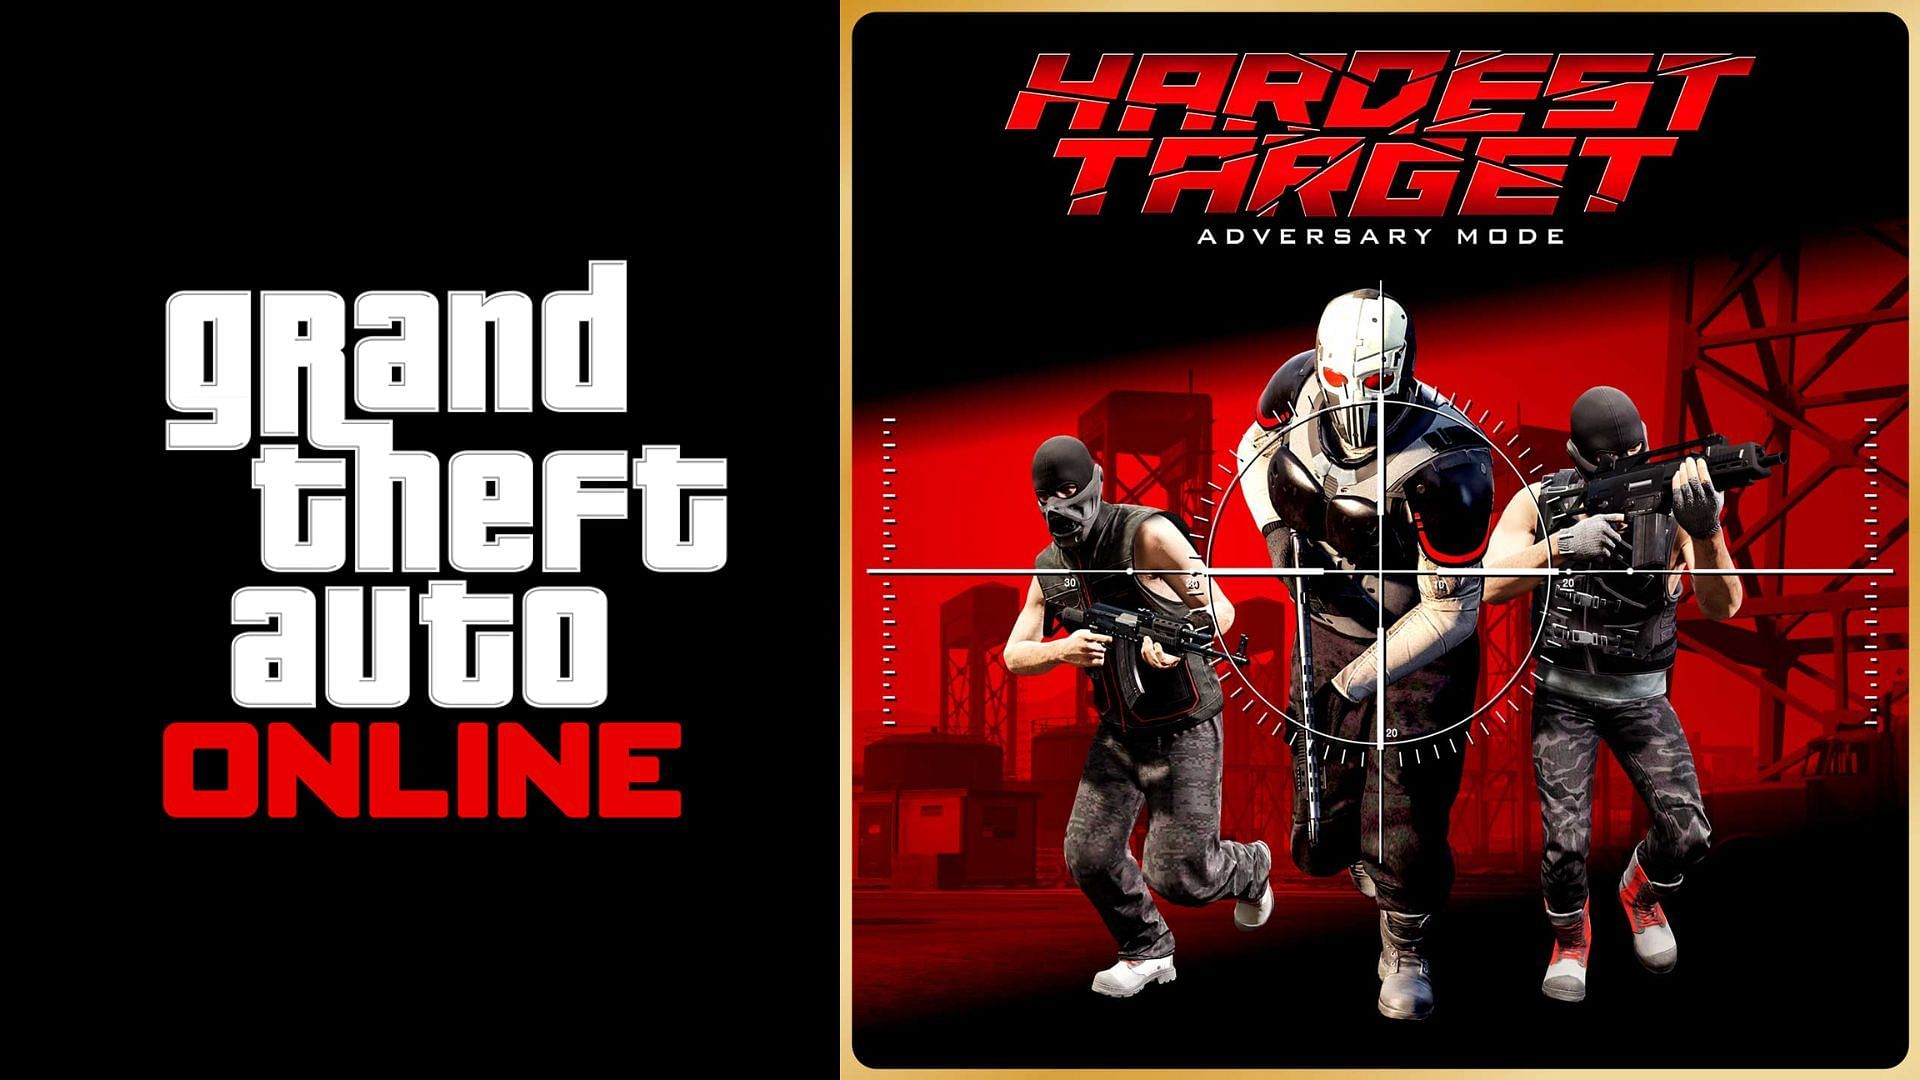 A brief about Hardest Target Adversary Mode in GTA Online with which players can earn 2x bonuses this week (Image via Sportskeeda)